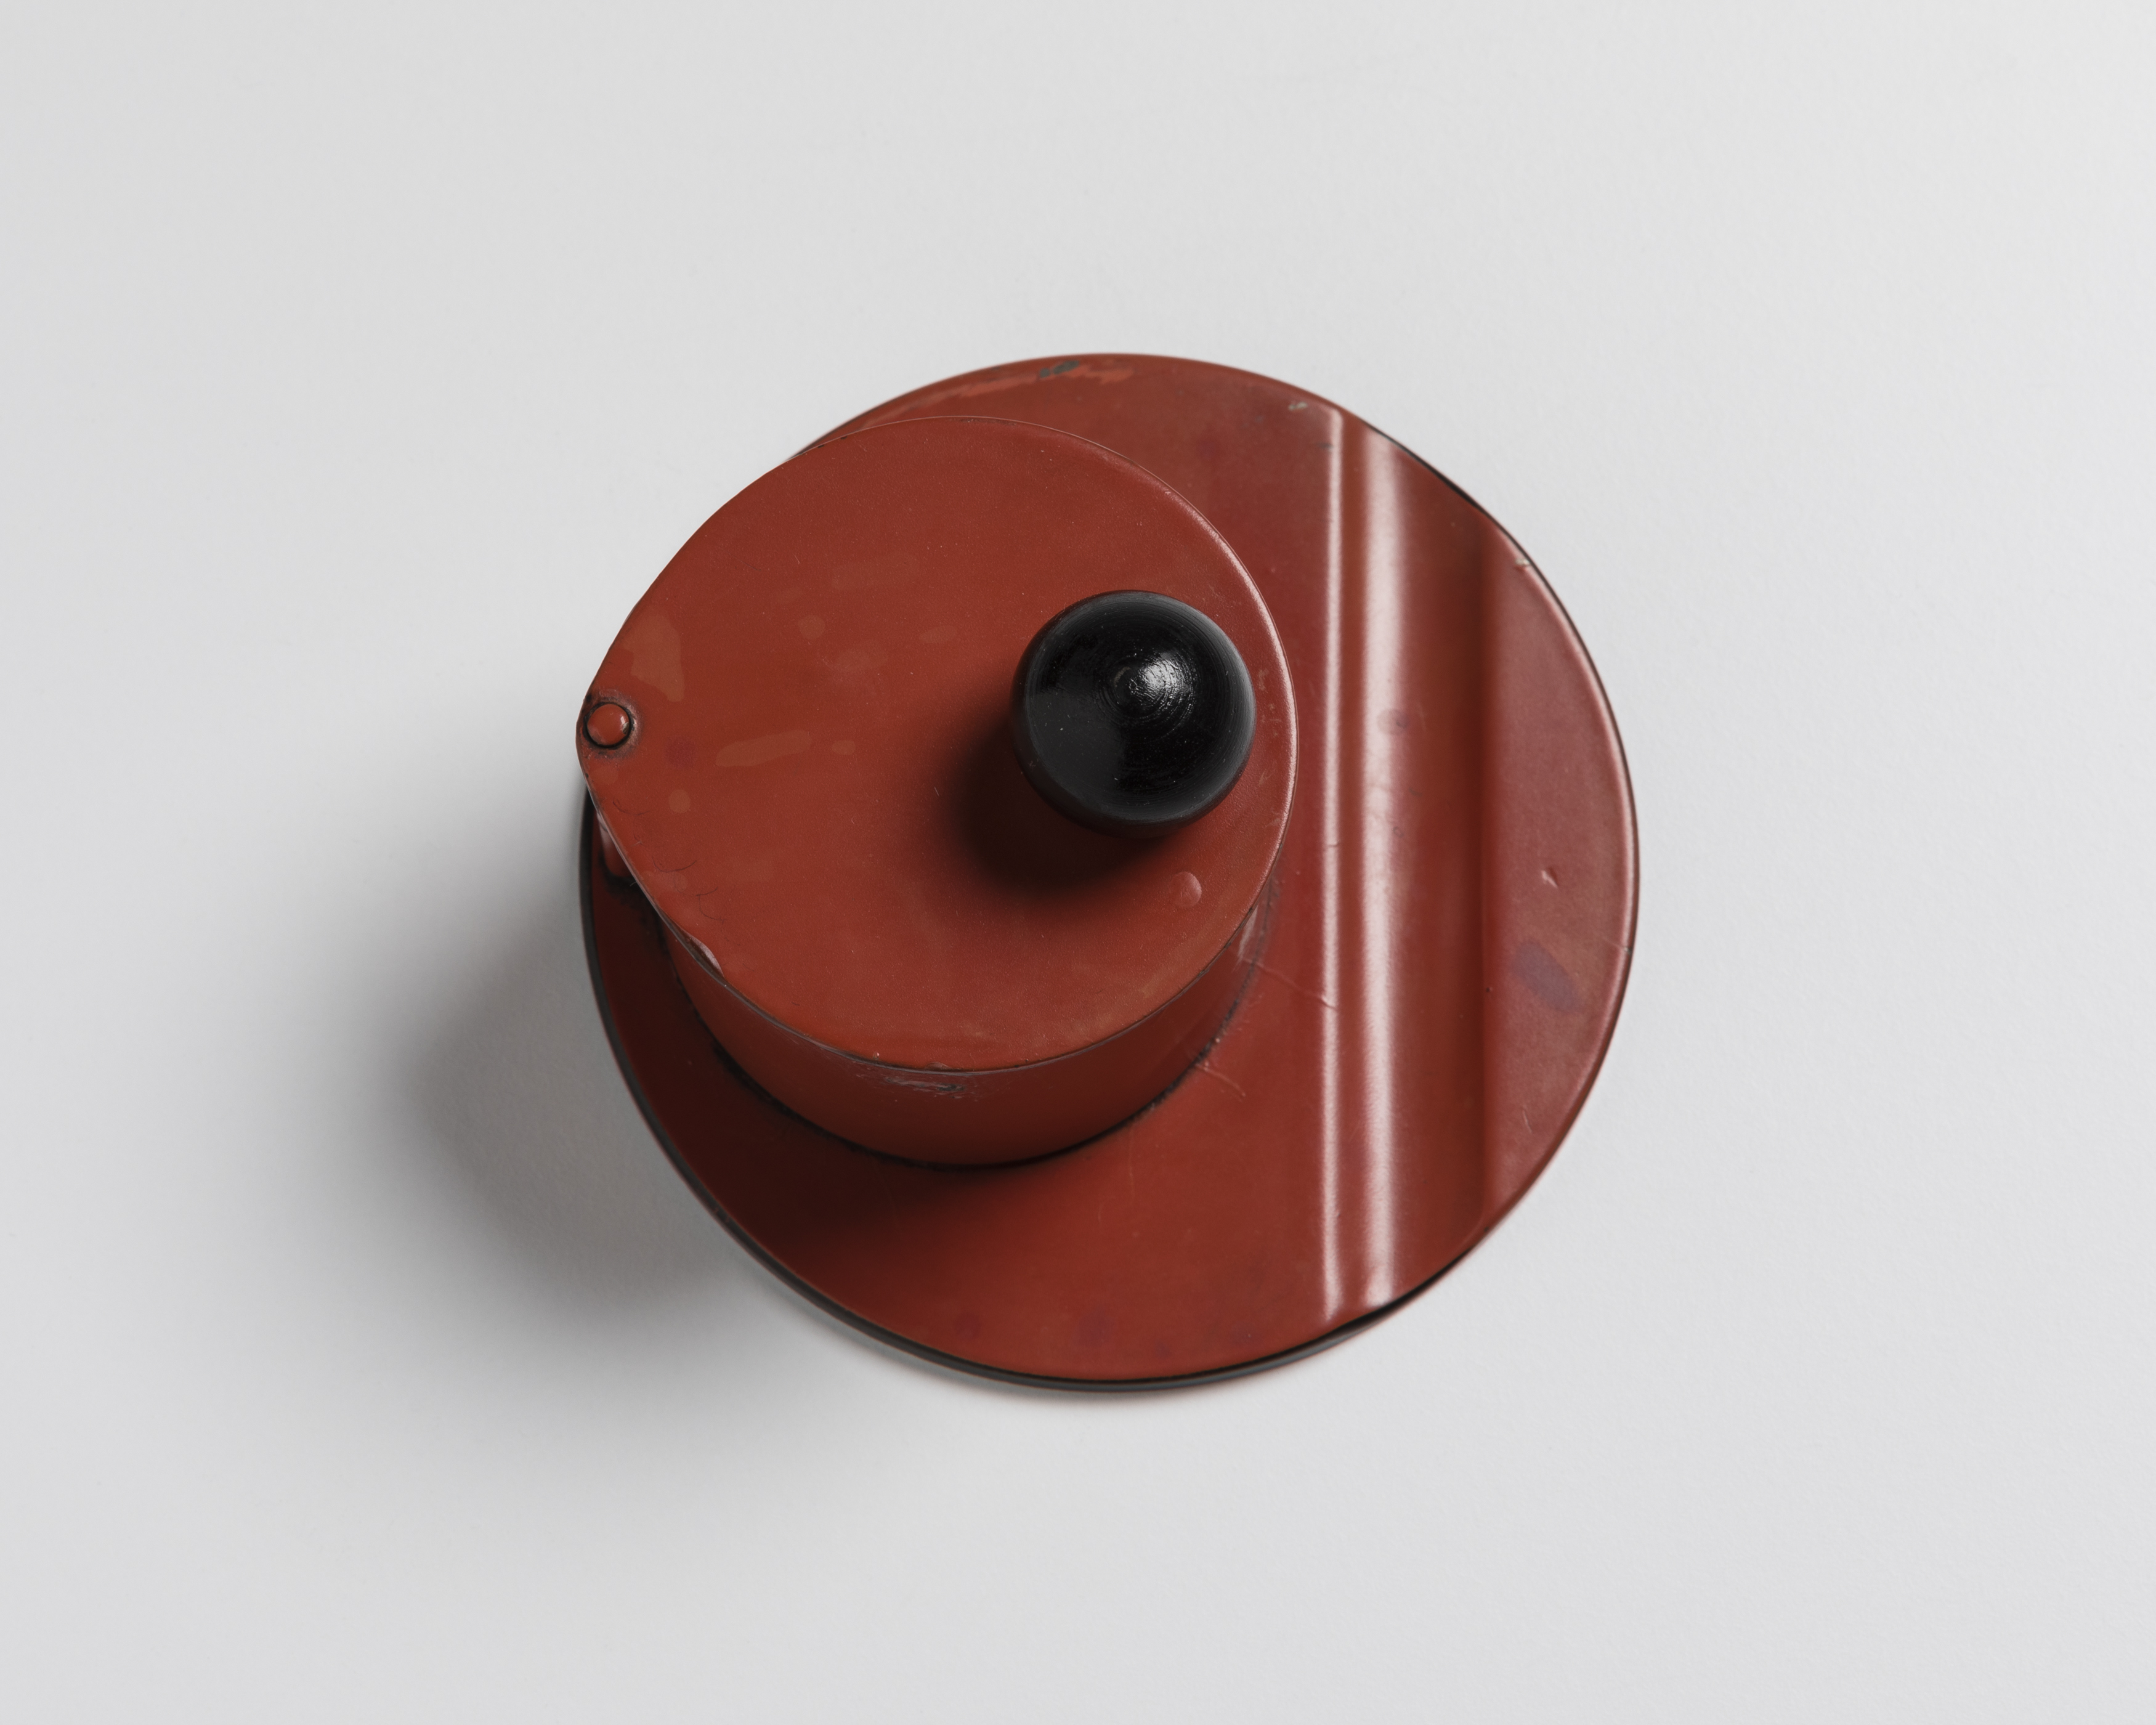 Red circular inkstand with a black ball finial on hinged cover, photographed from above.